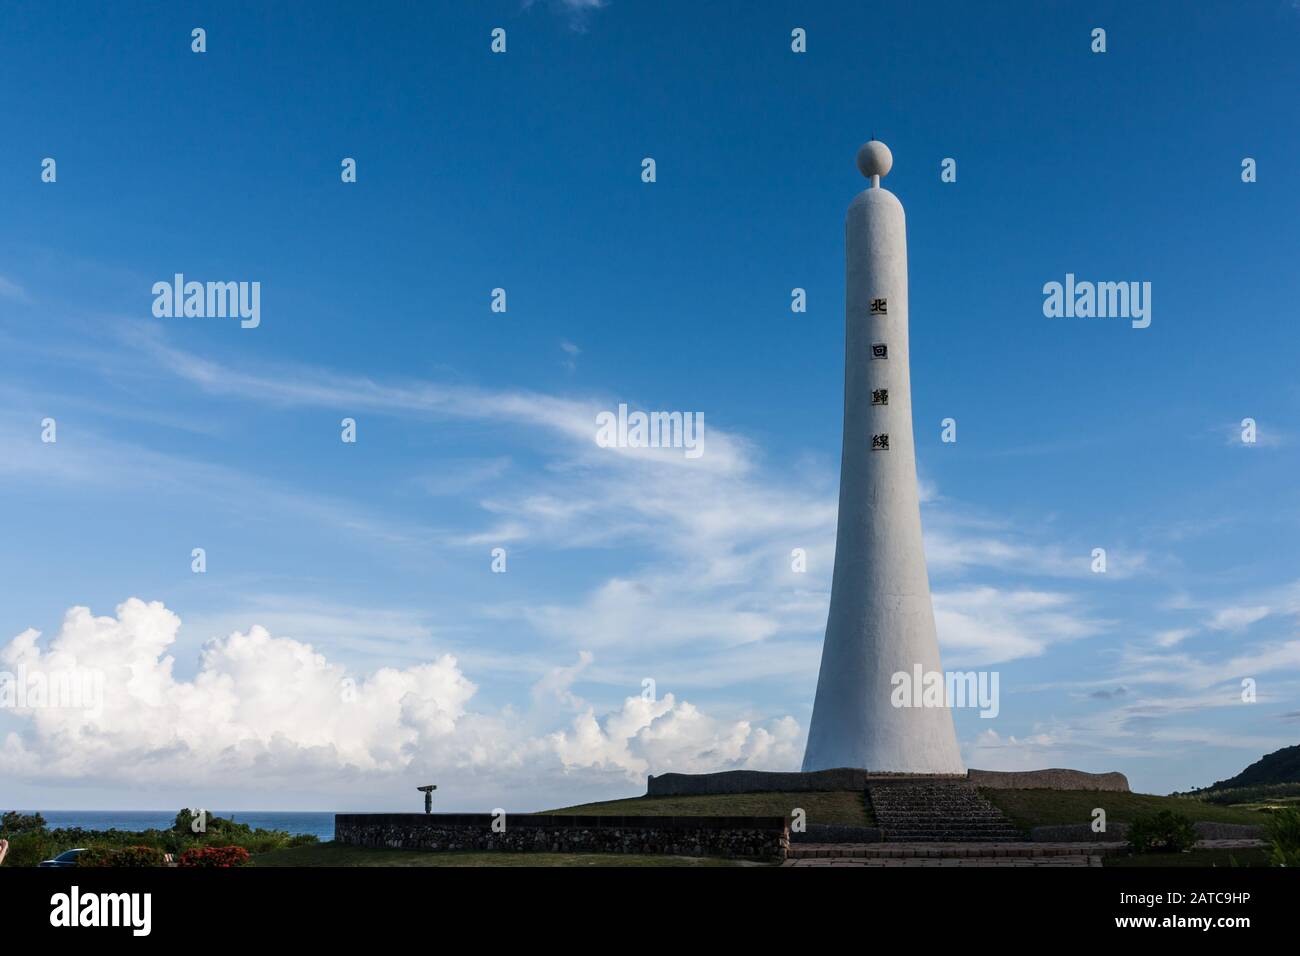 Tropic of Cancer Maker monument, landmark along Provincial Highway 11 (Hualien-Taitung Coastal Highway), Fengbin Township, Hualien County, Taiwan Stock Photo